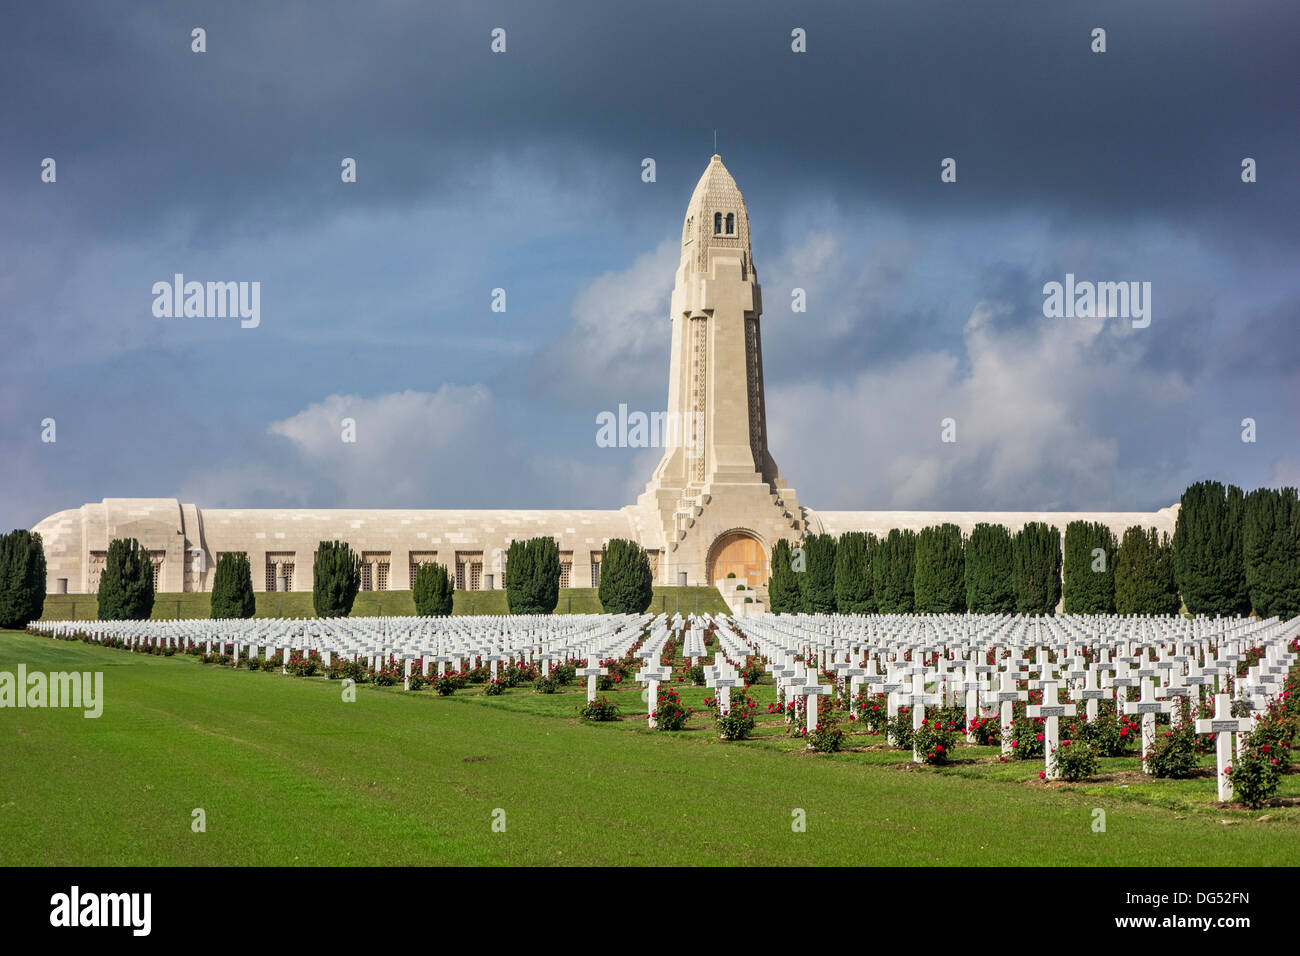 Douaumont ossuary and military cemetery for First World War One French and German soldiers who died at Battle of Verdun, France Stock Photo